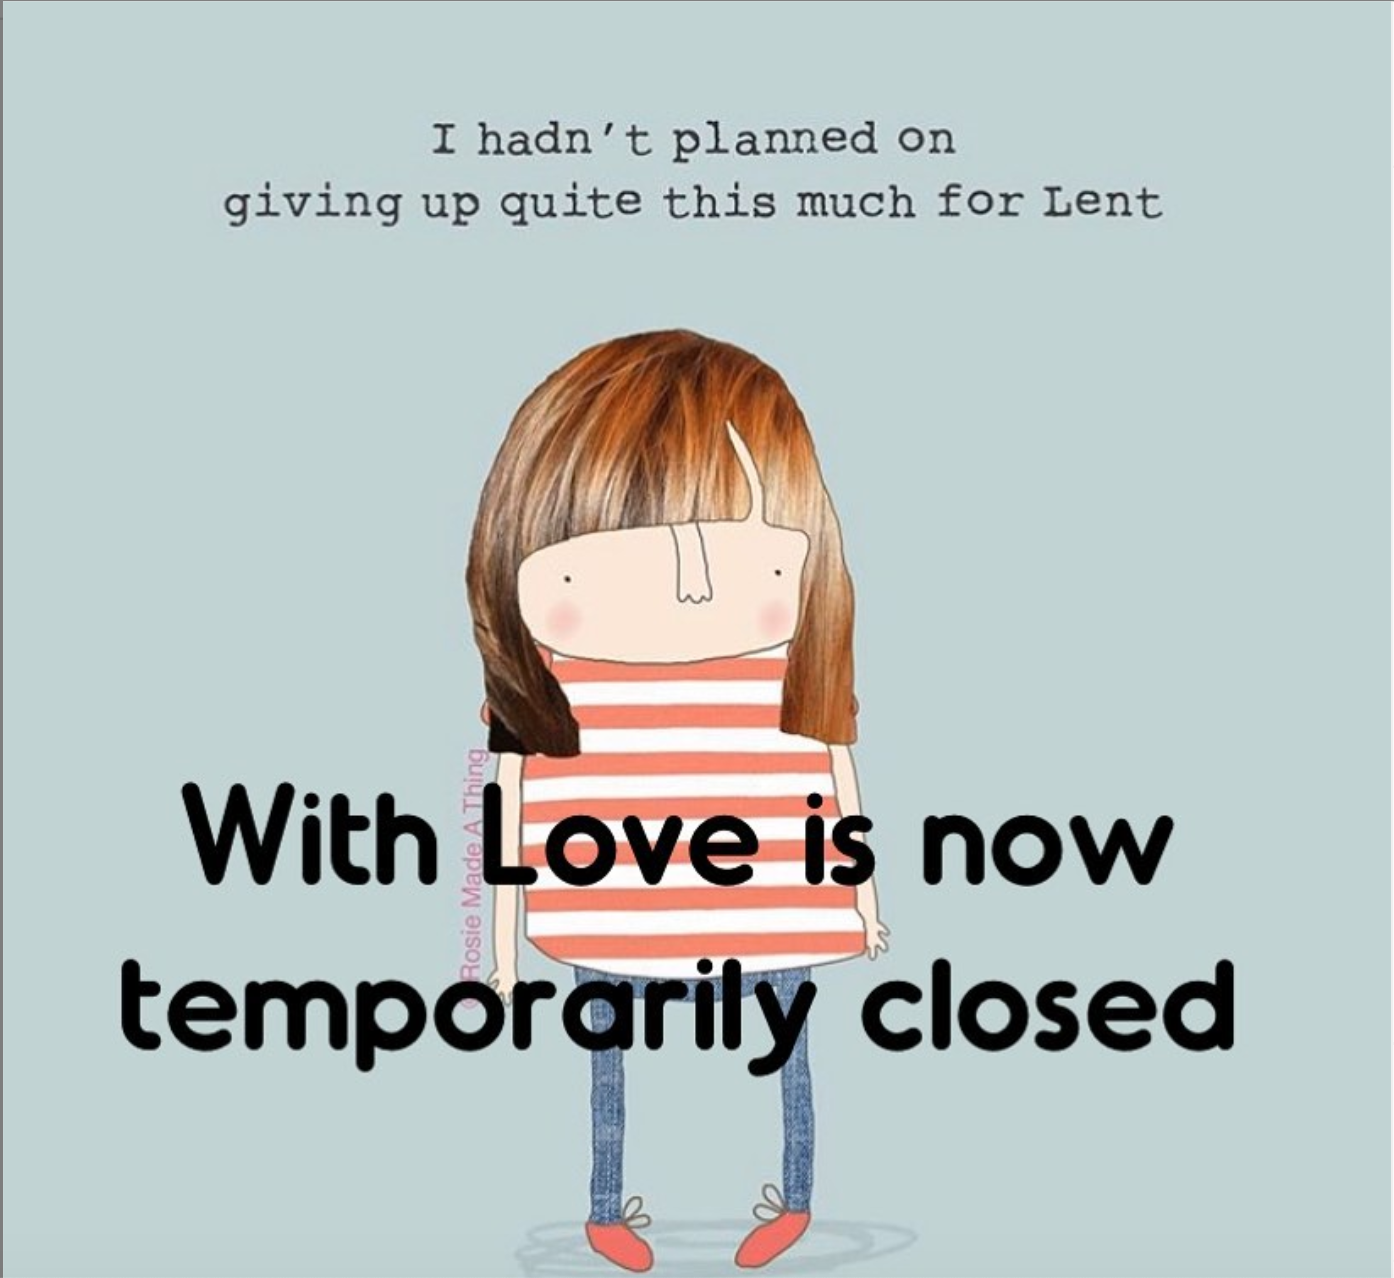 Above: Becky Abbiss repurposed a Rosie Made A Thing image to announce the shop’s temporary closure on With Love’s social media sites.